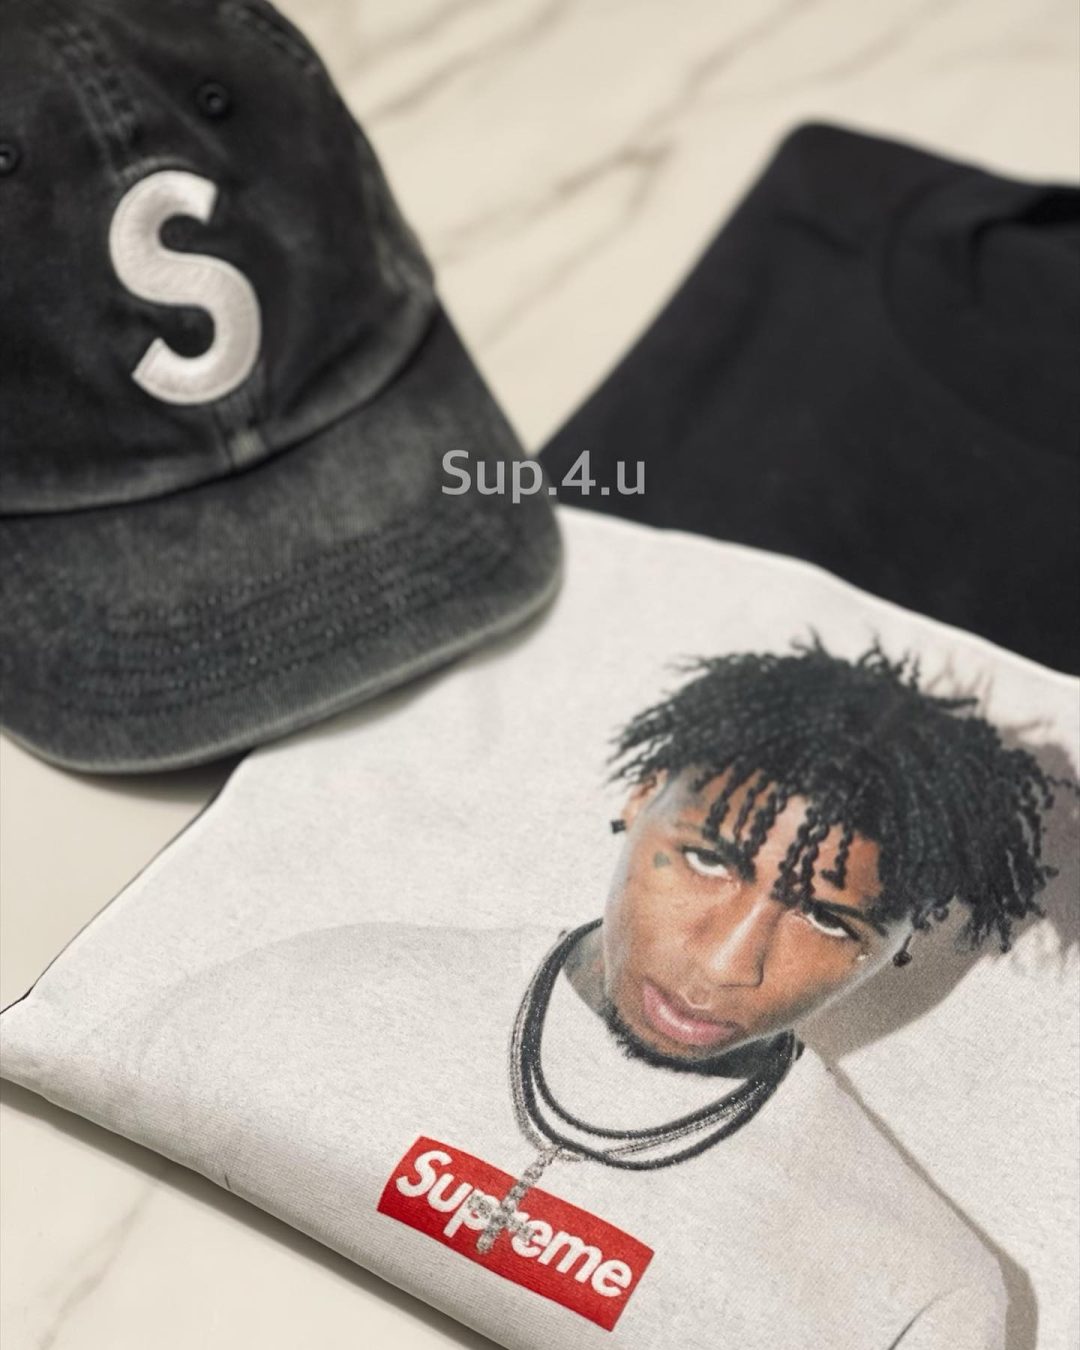 supreme-23fw-23aw-launch-20230819-week1-release-items-look